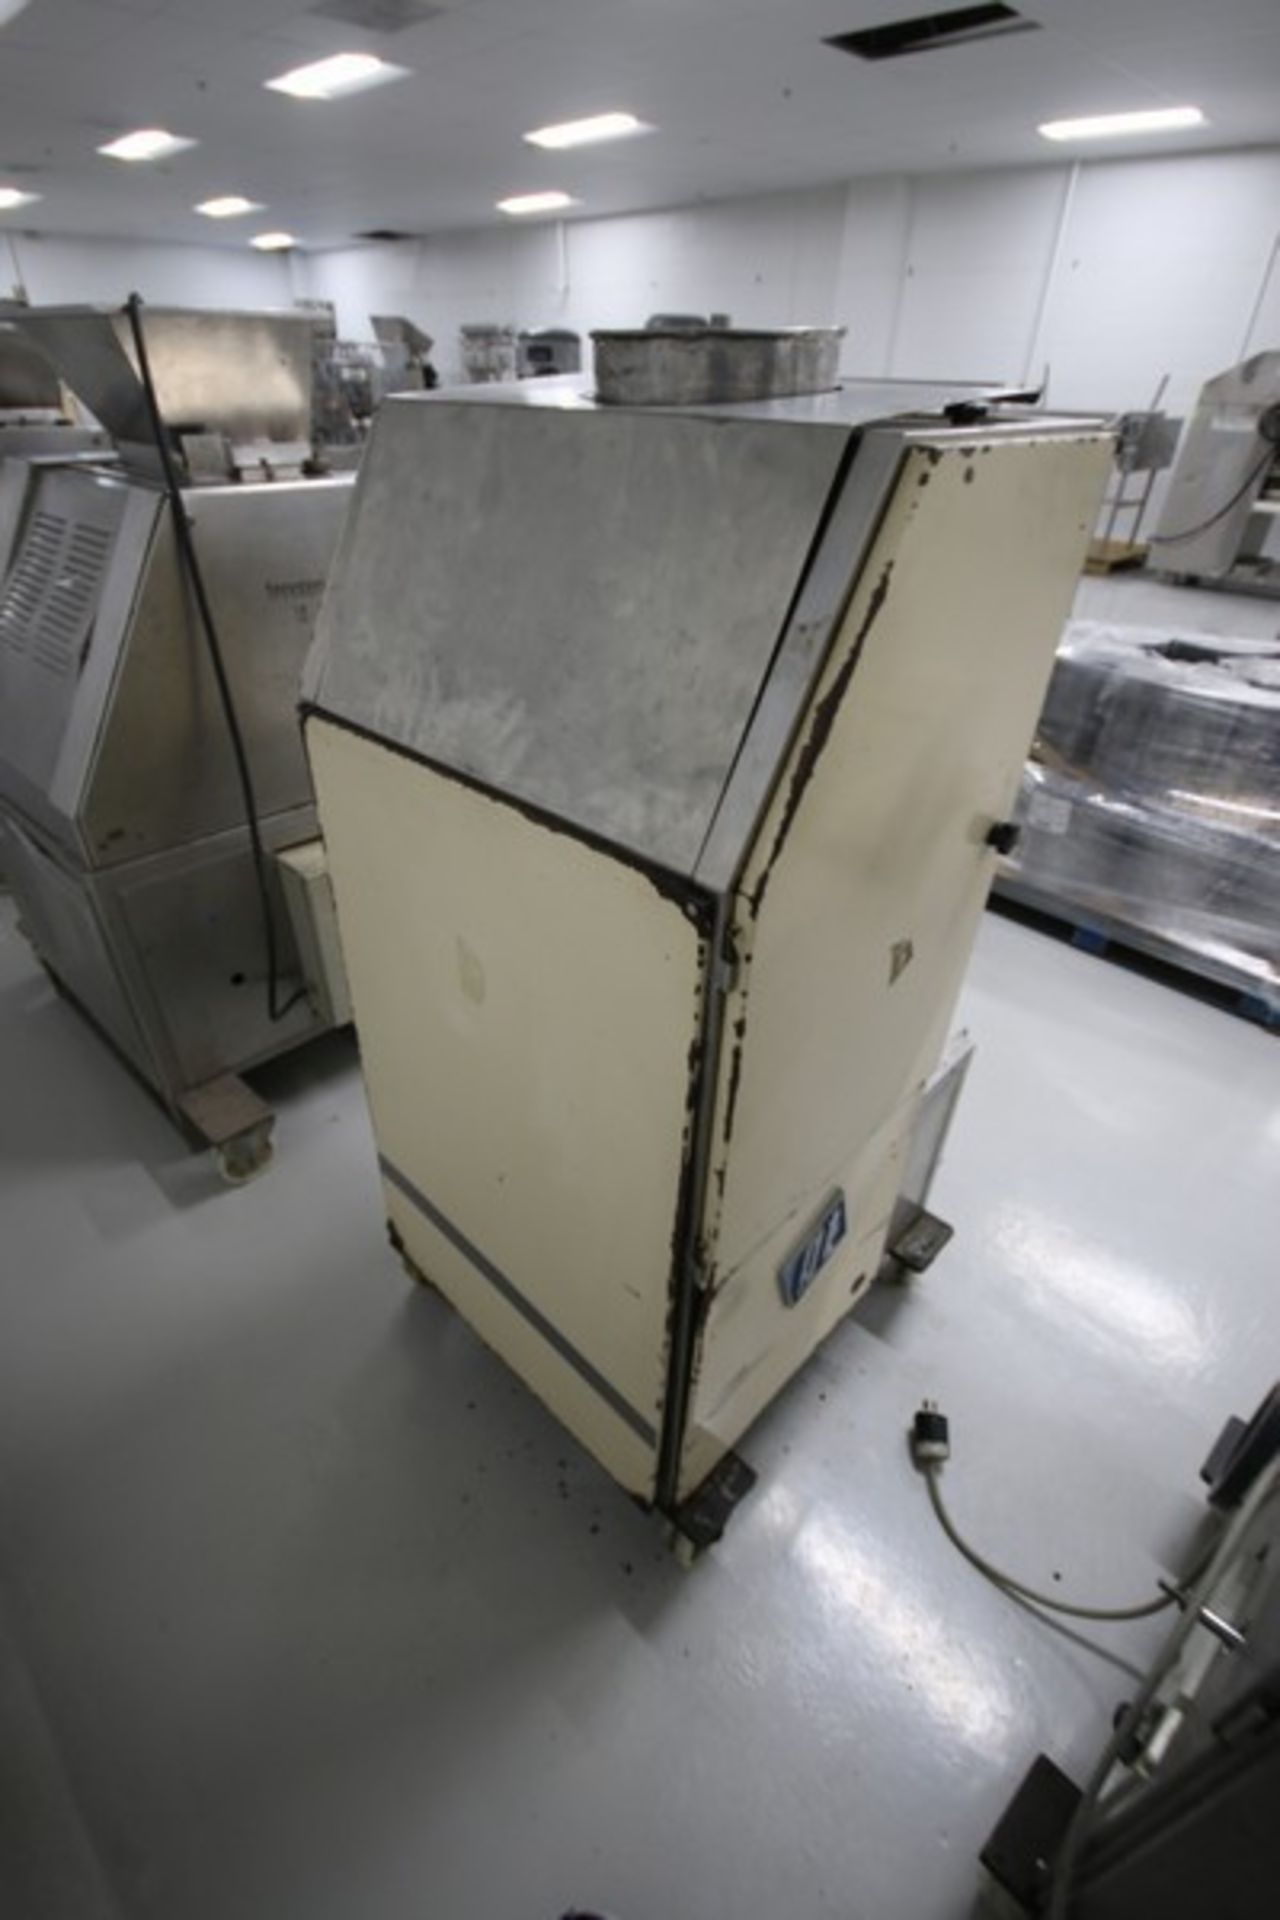 Toresani Tortellini Machine, M/N MR265, Mounted on Portable Frame (LOCATED IN BELTSVILLE, MD) ( - Image 3 of 4